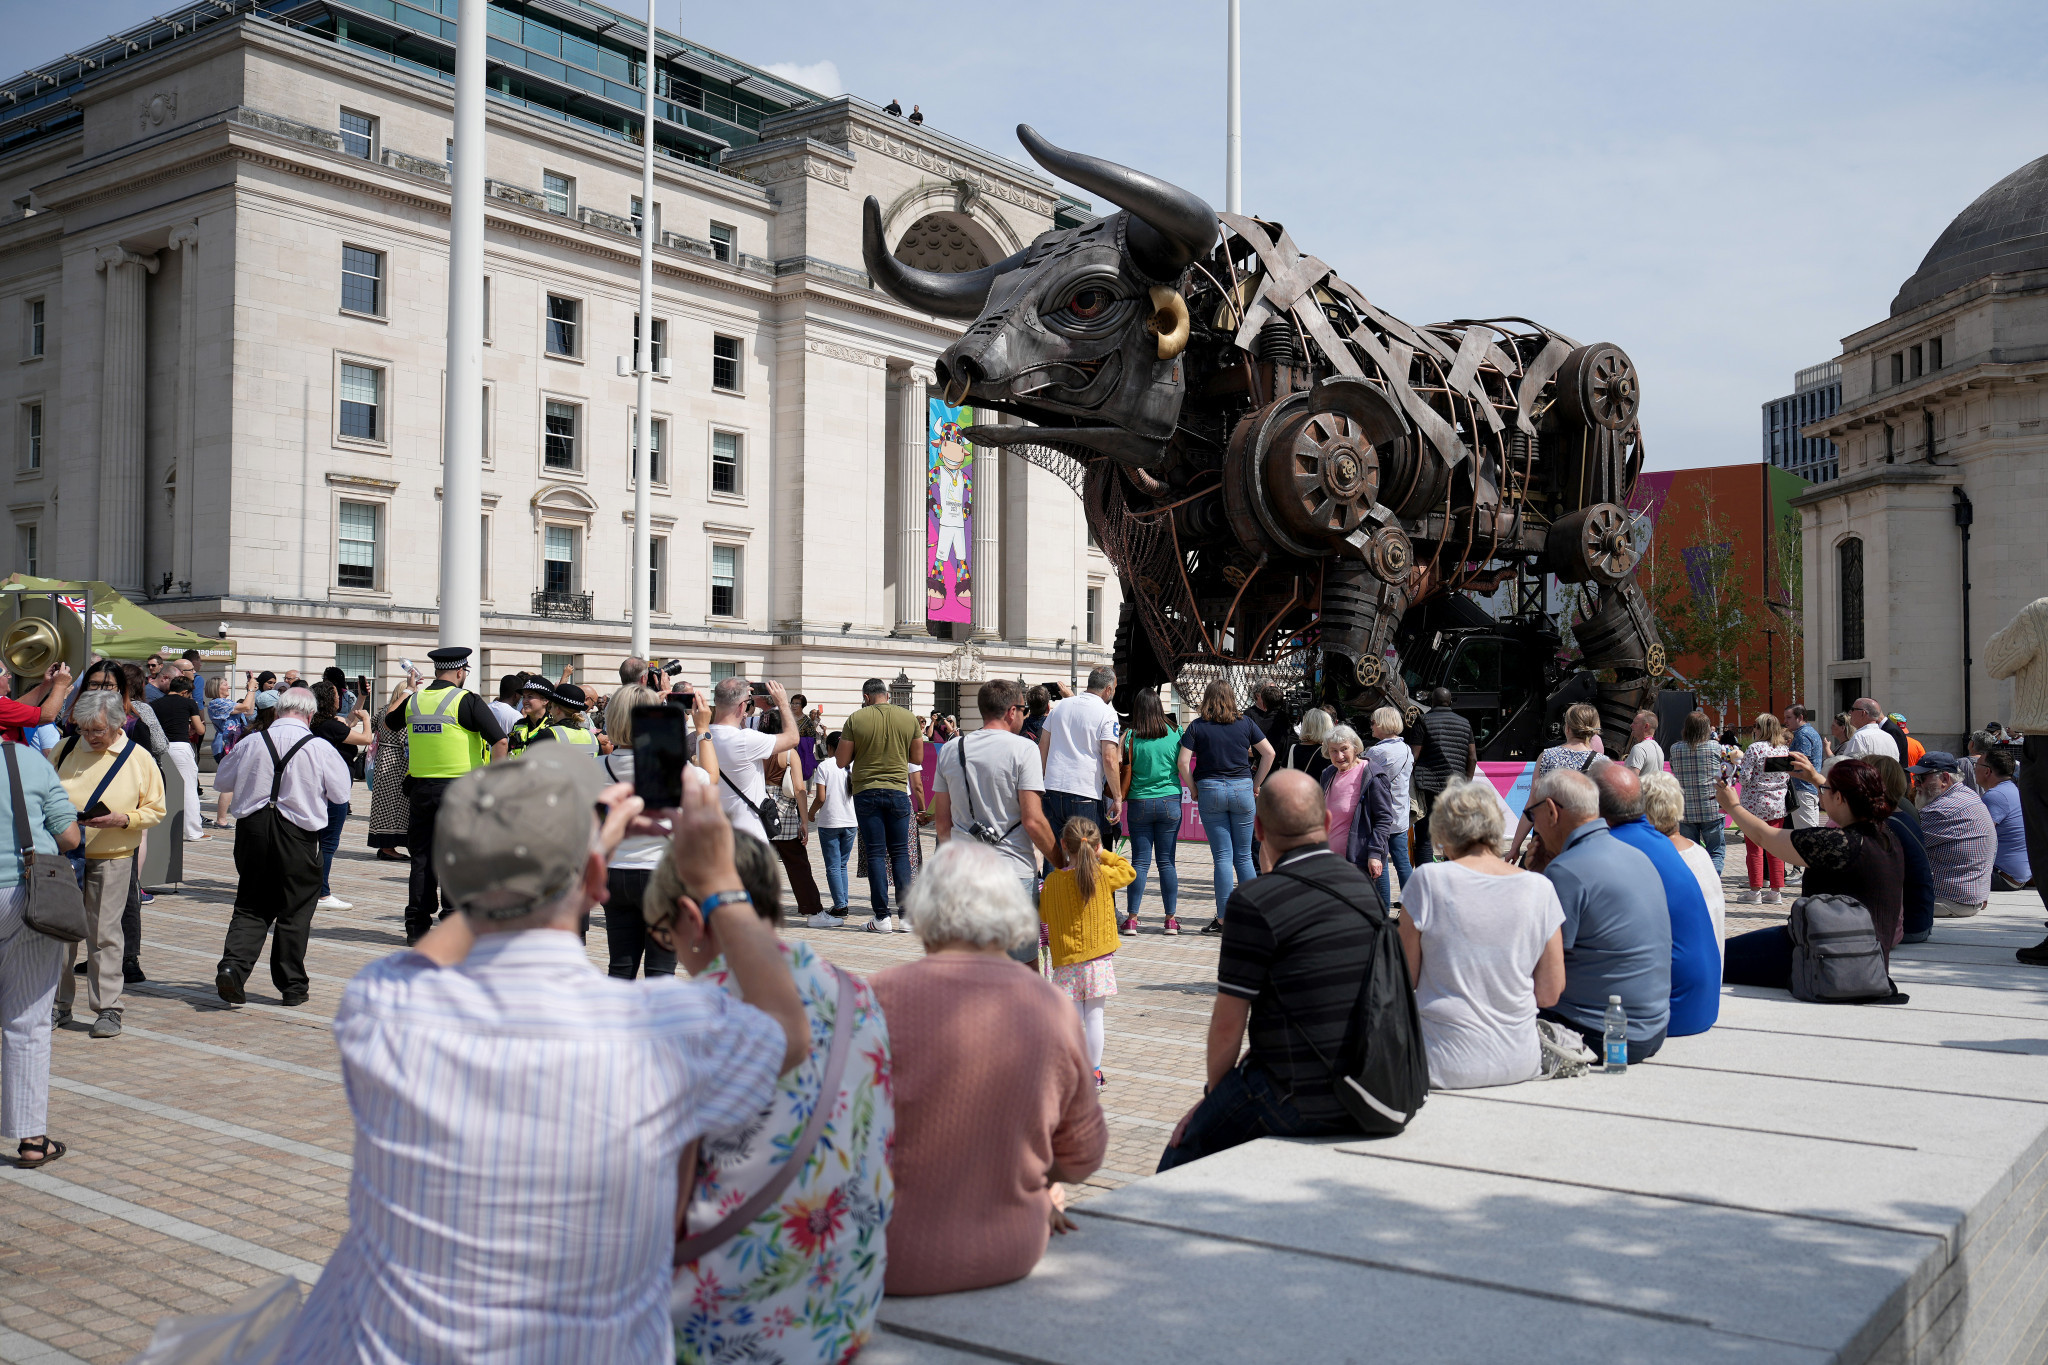 A reported four million people viewed the Raging Bull in Centenary Square ©Getty Images